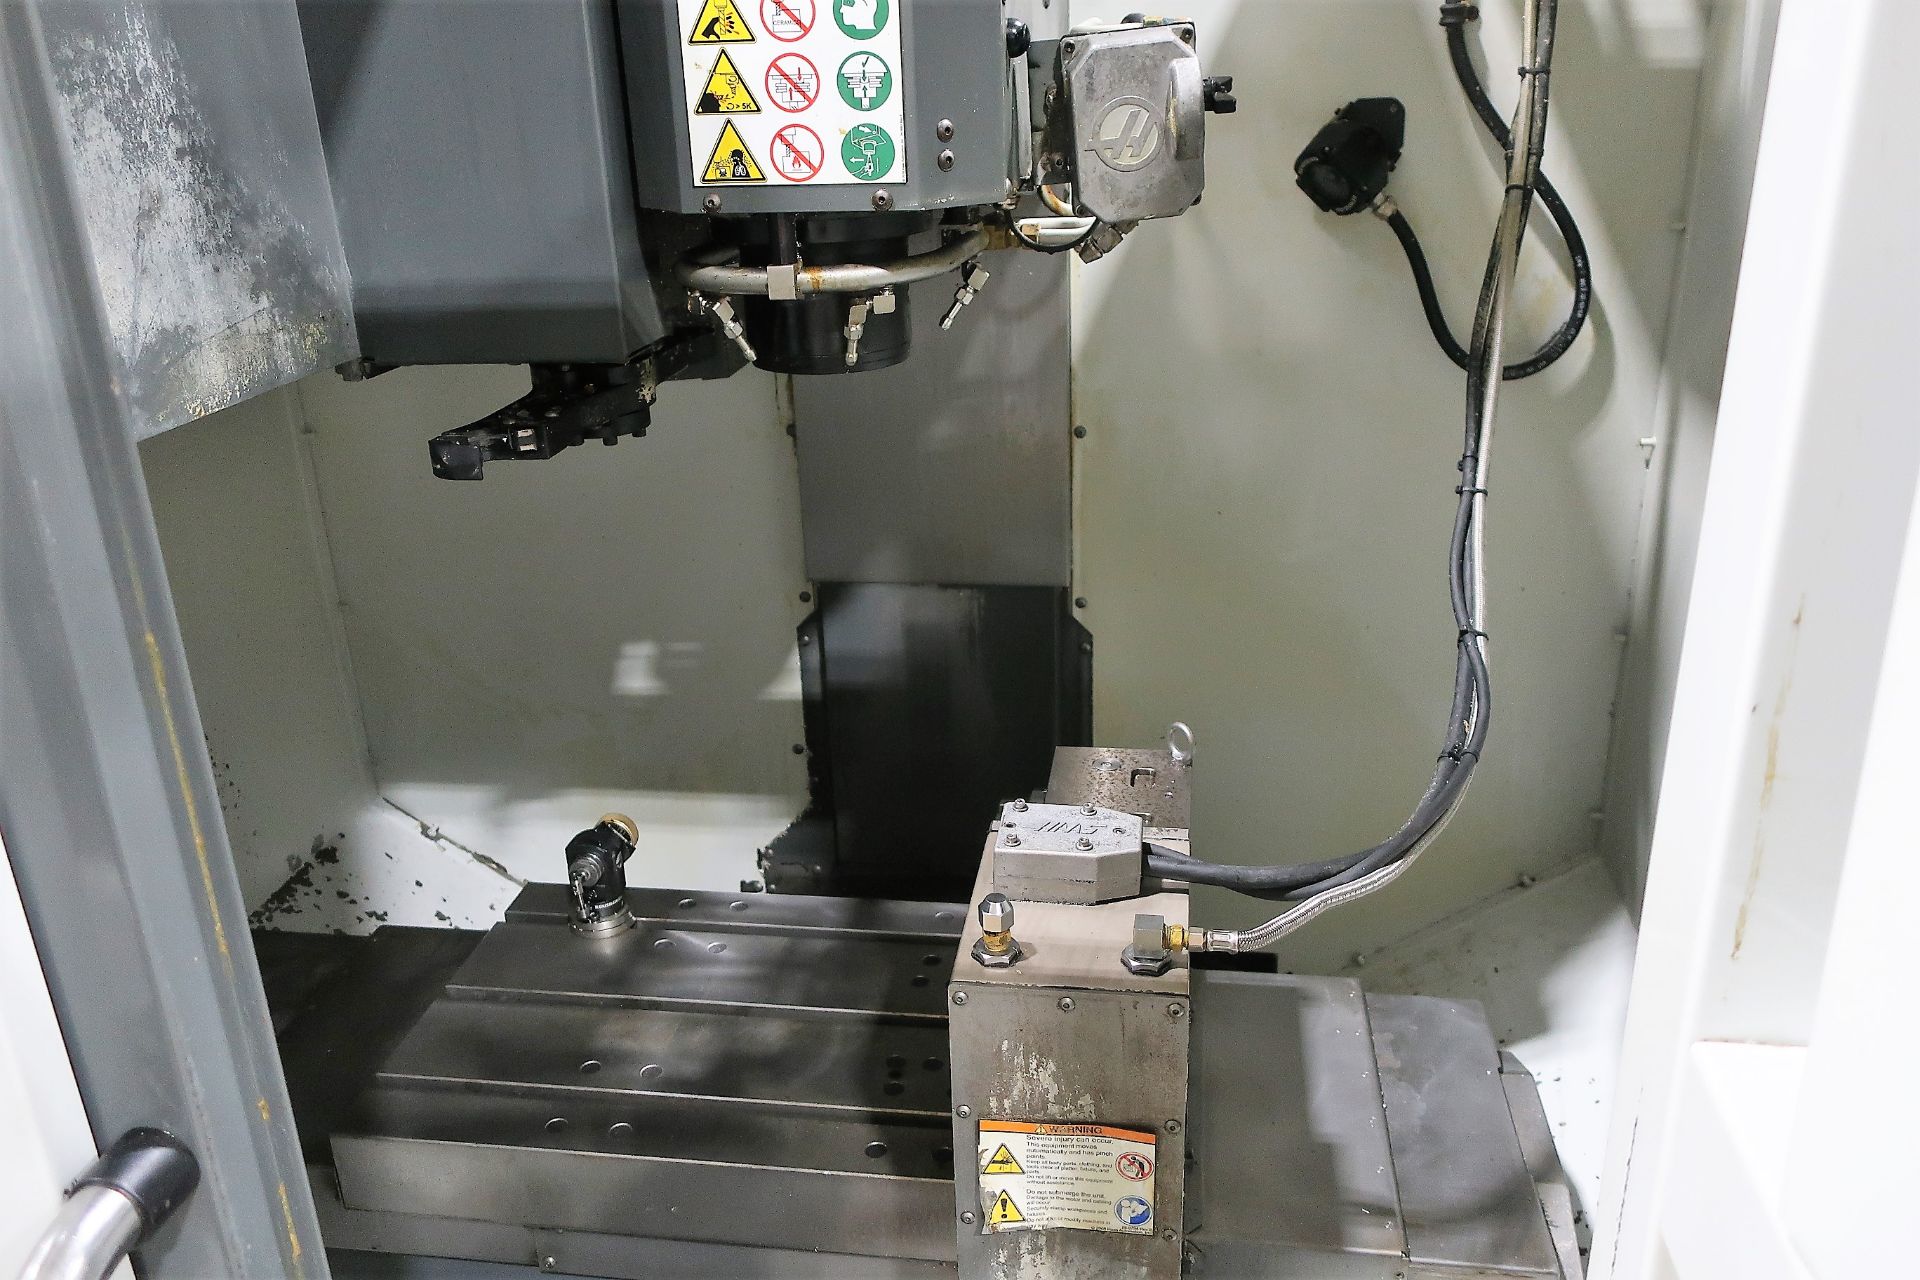 HAAS DT-1 4-AXIS CNC DRILL/TAP VERTICAL MACHINING CENTER, S/N 1131126, NEW 2016 - Image 4 of 10